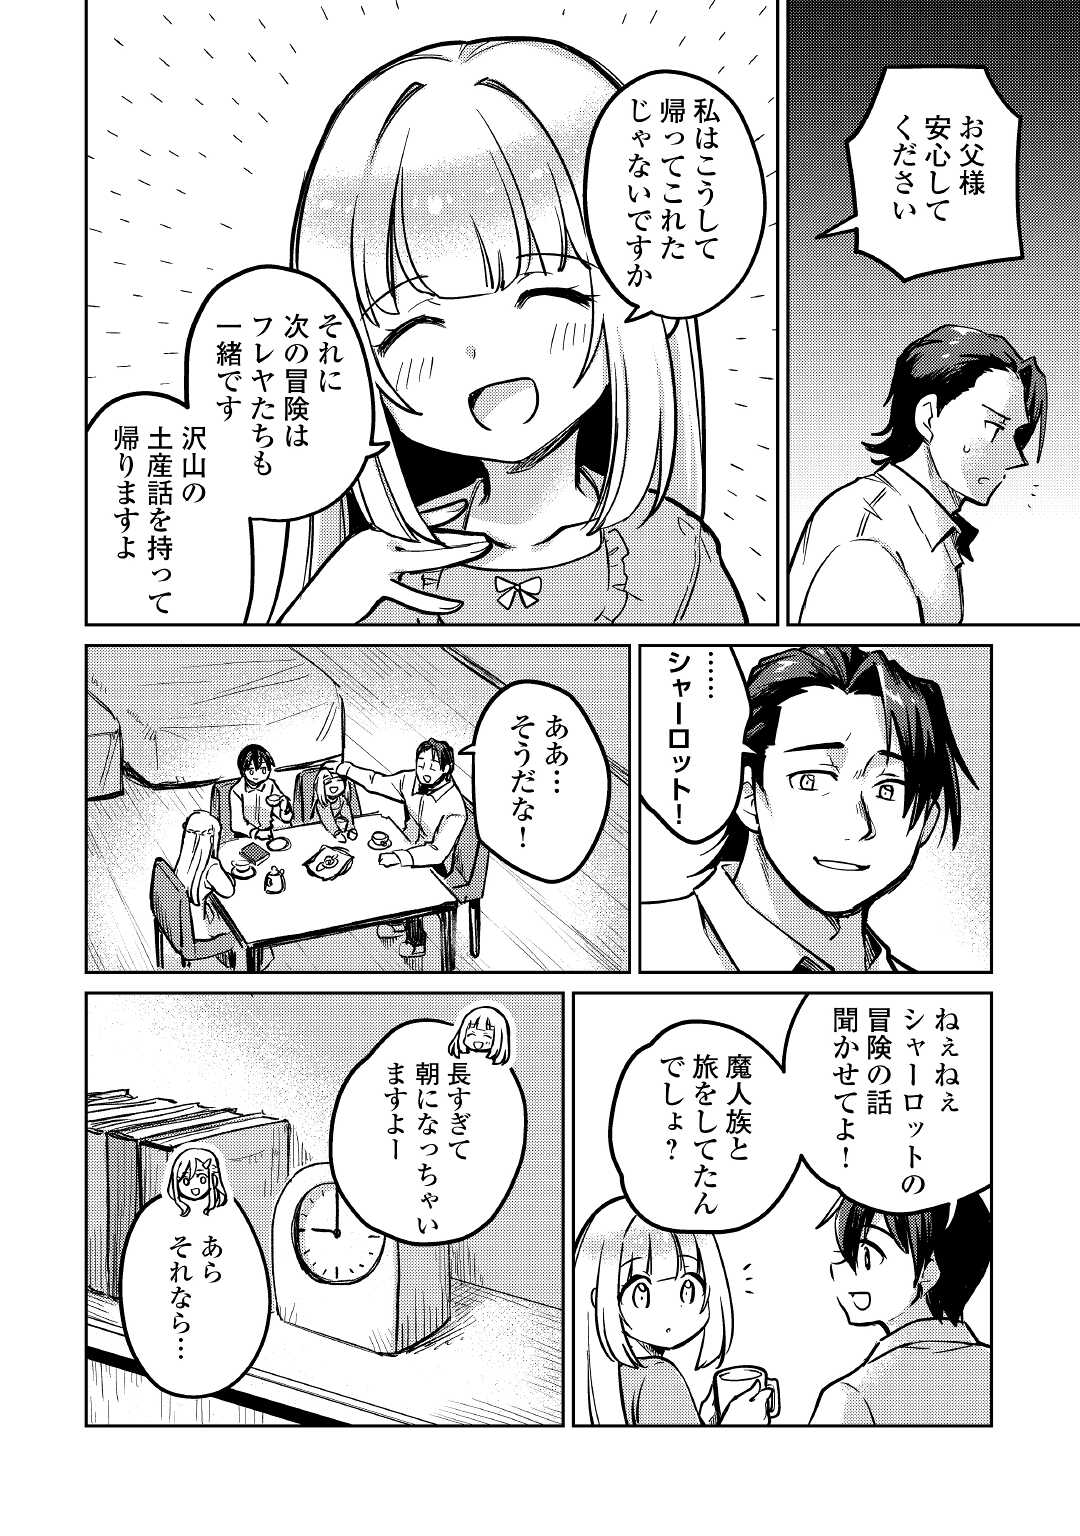 The Former Structural Researcher’s Story of Otherworldly Adventure 第42話 - Page 24